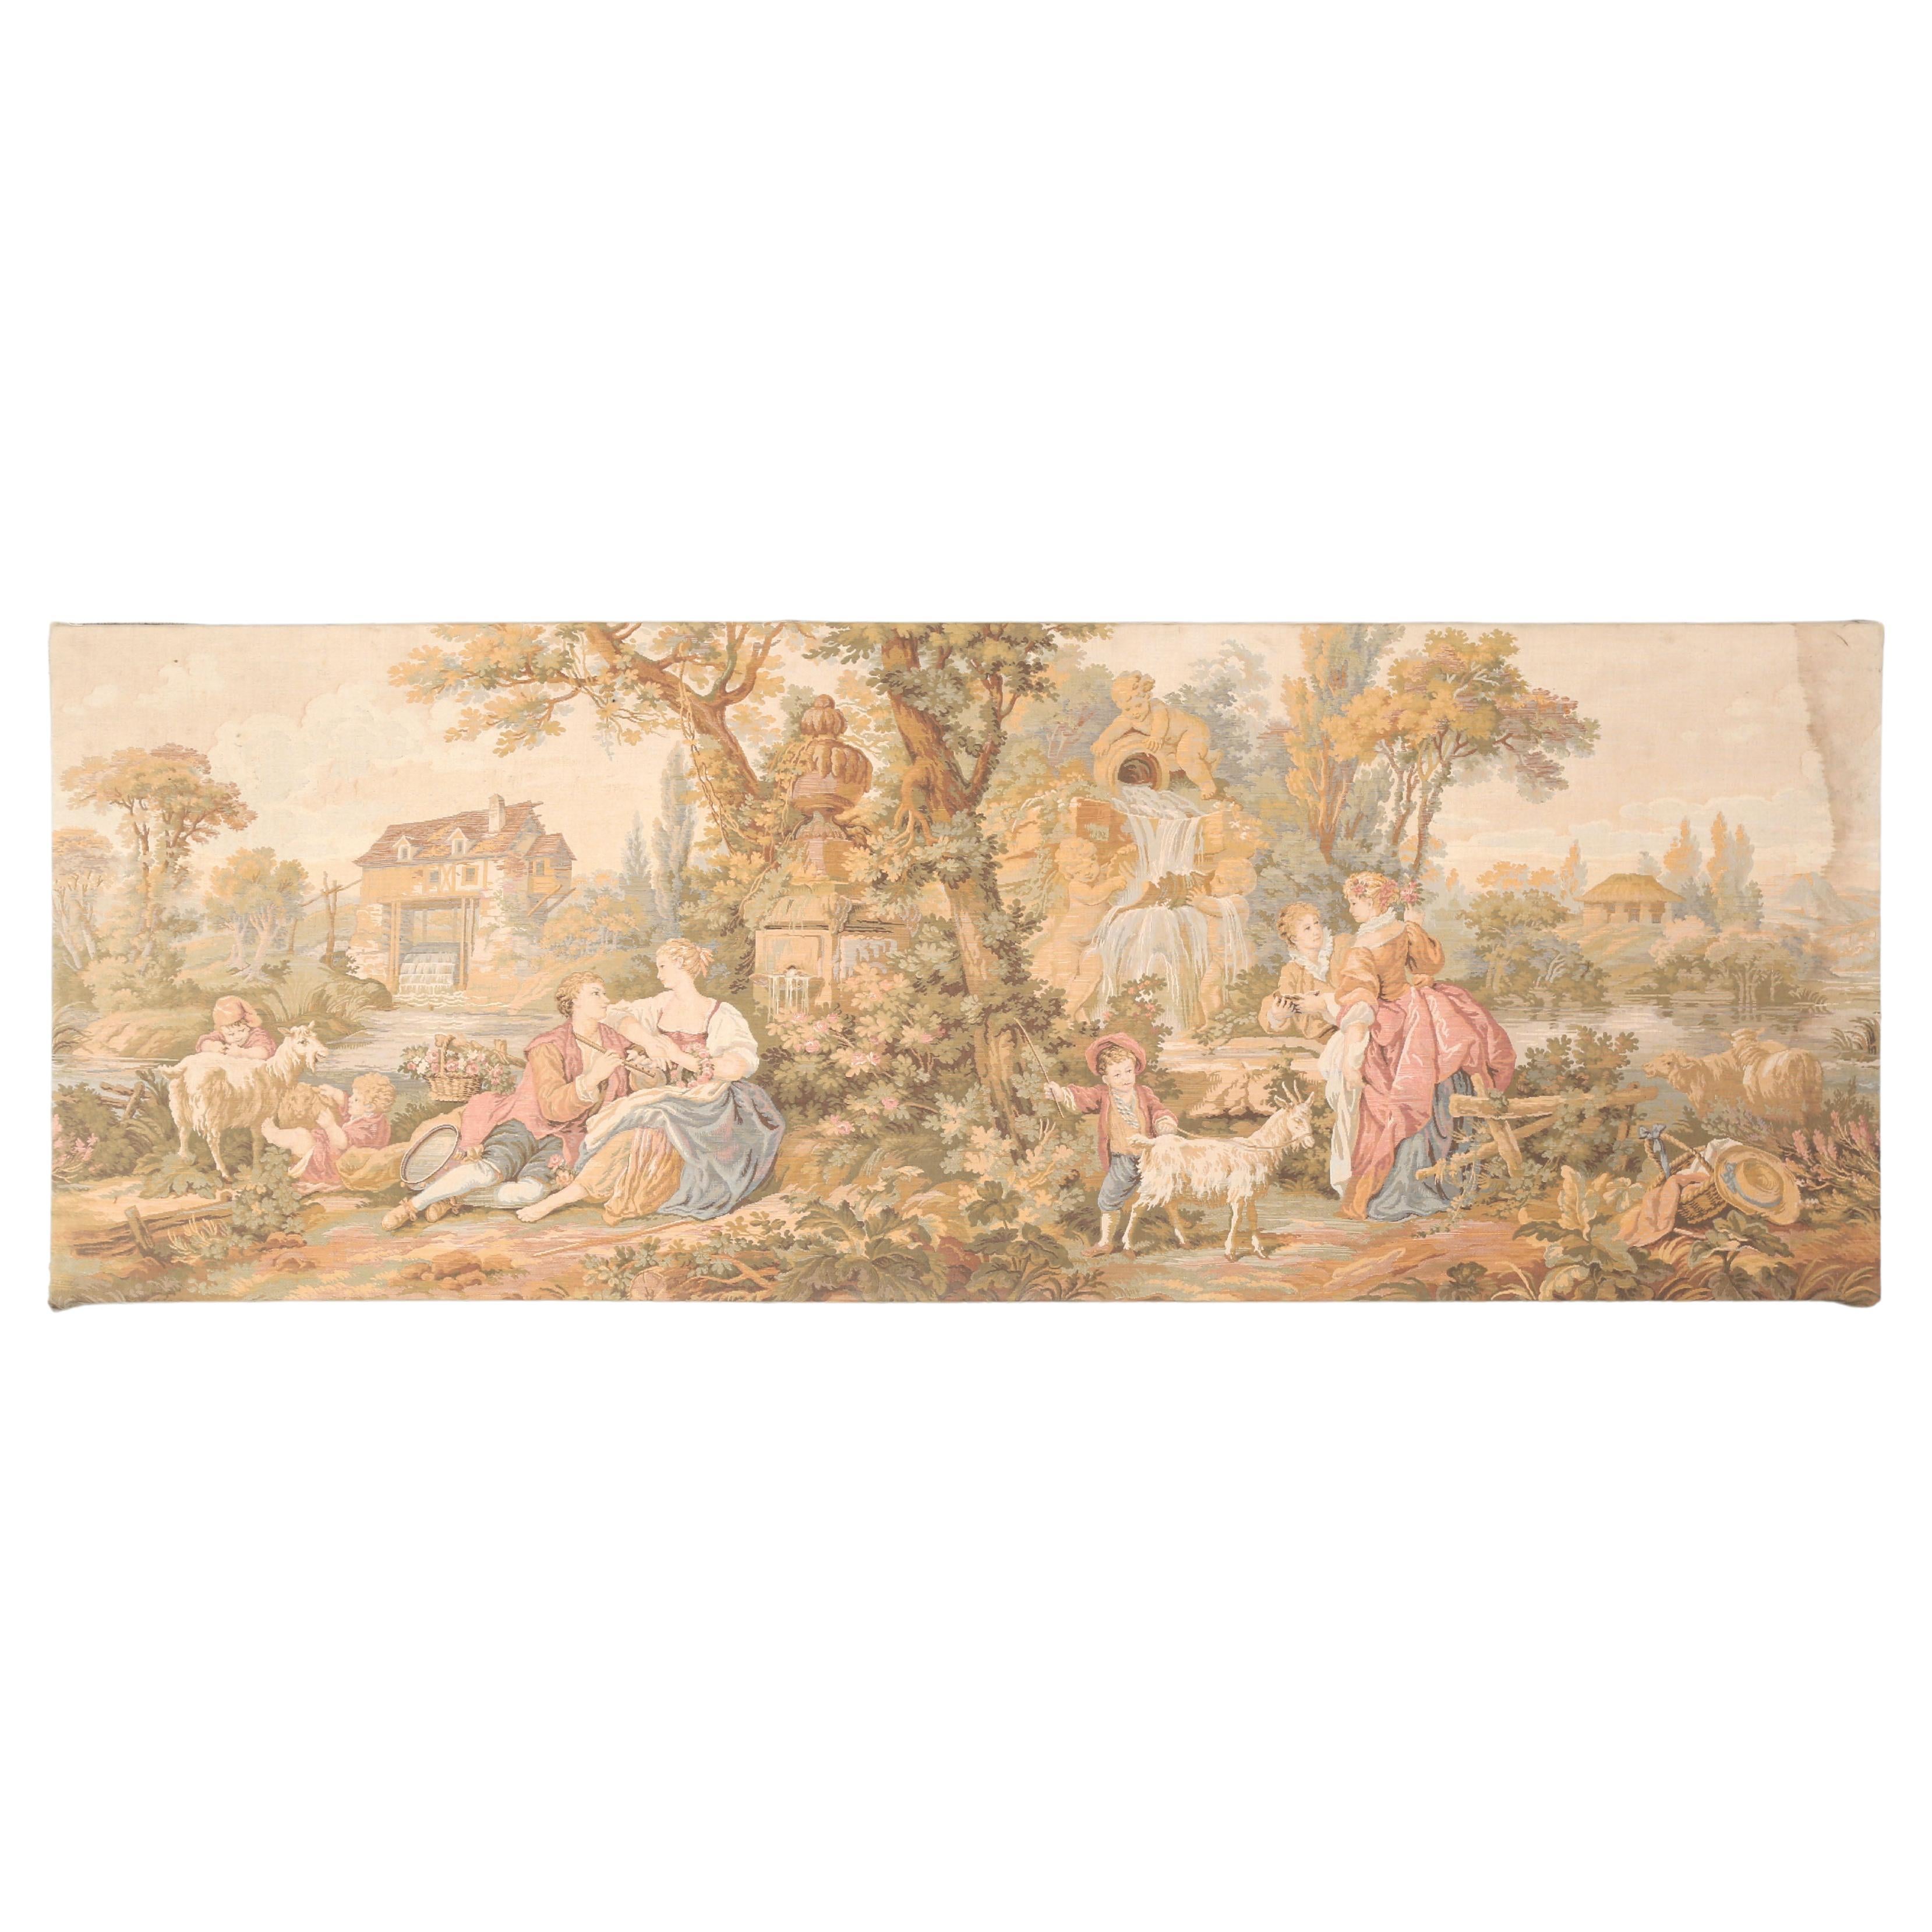 Antique French Wall Tapestry c1900-1920